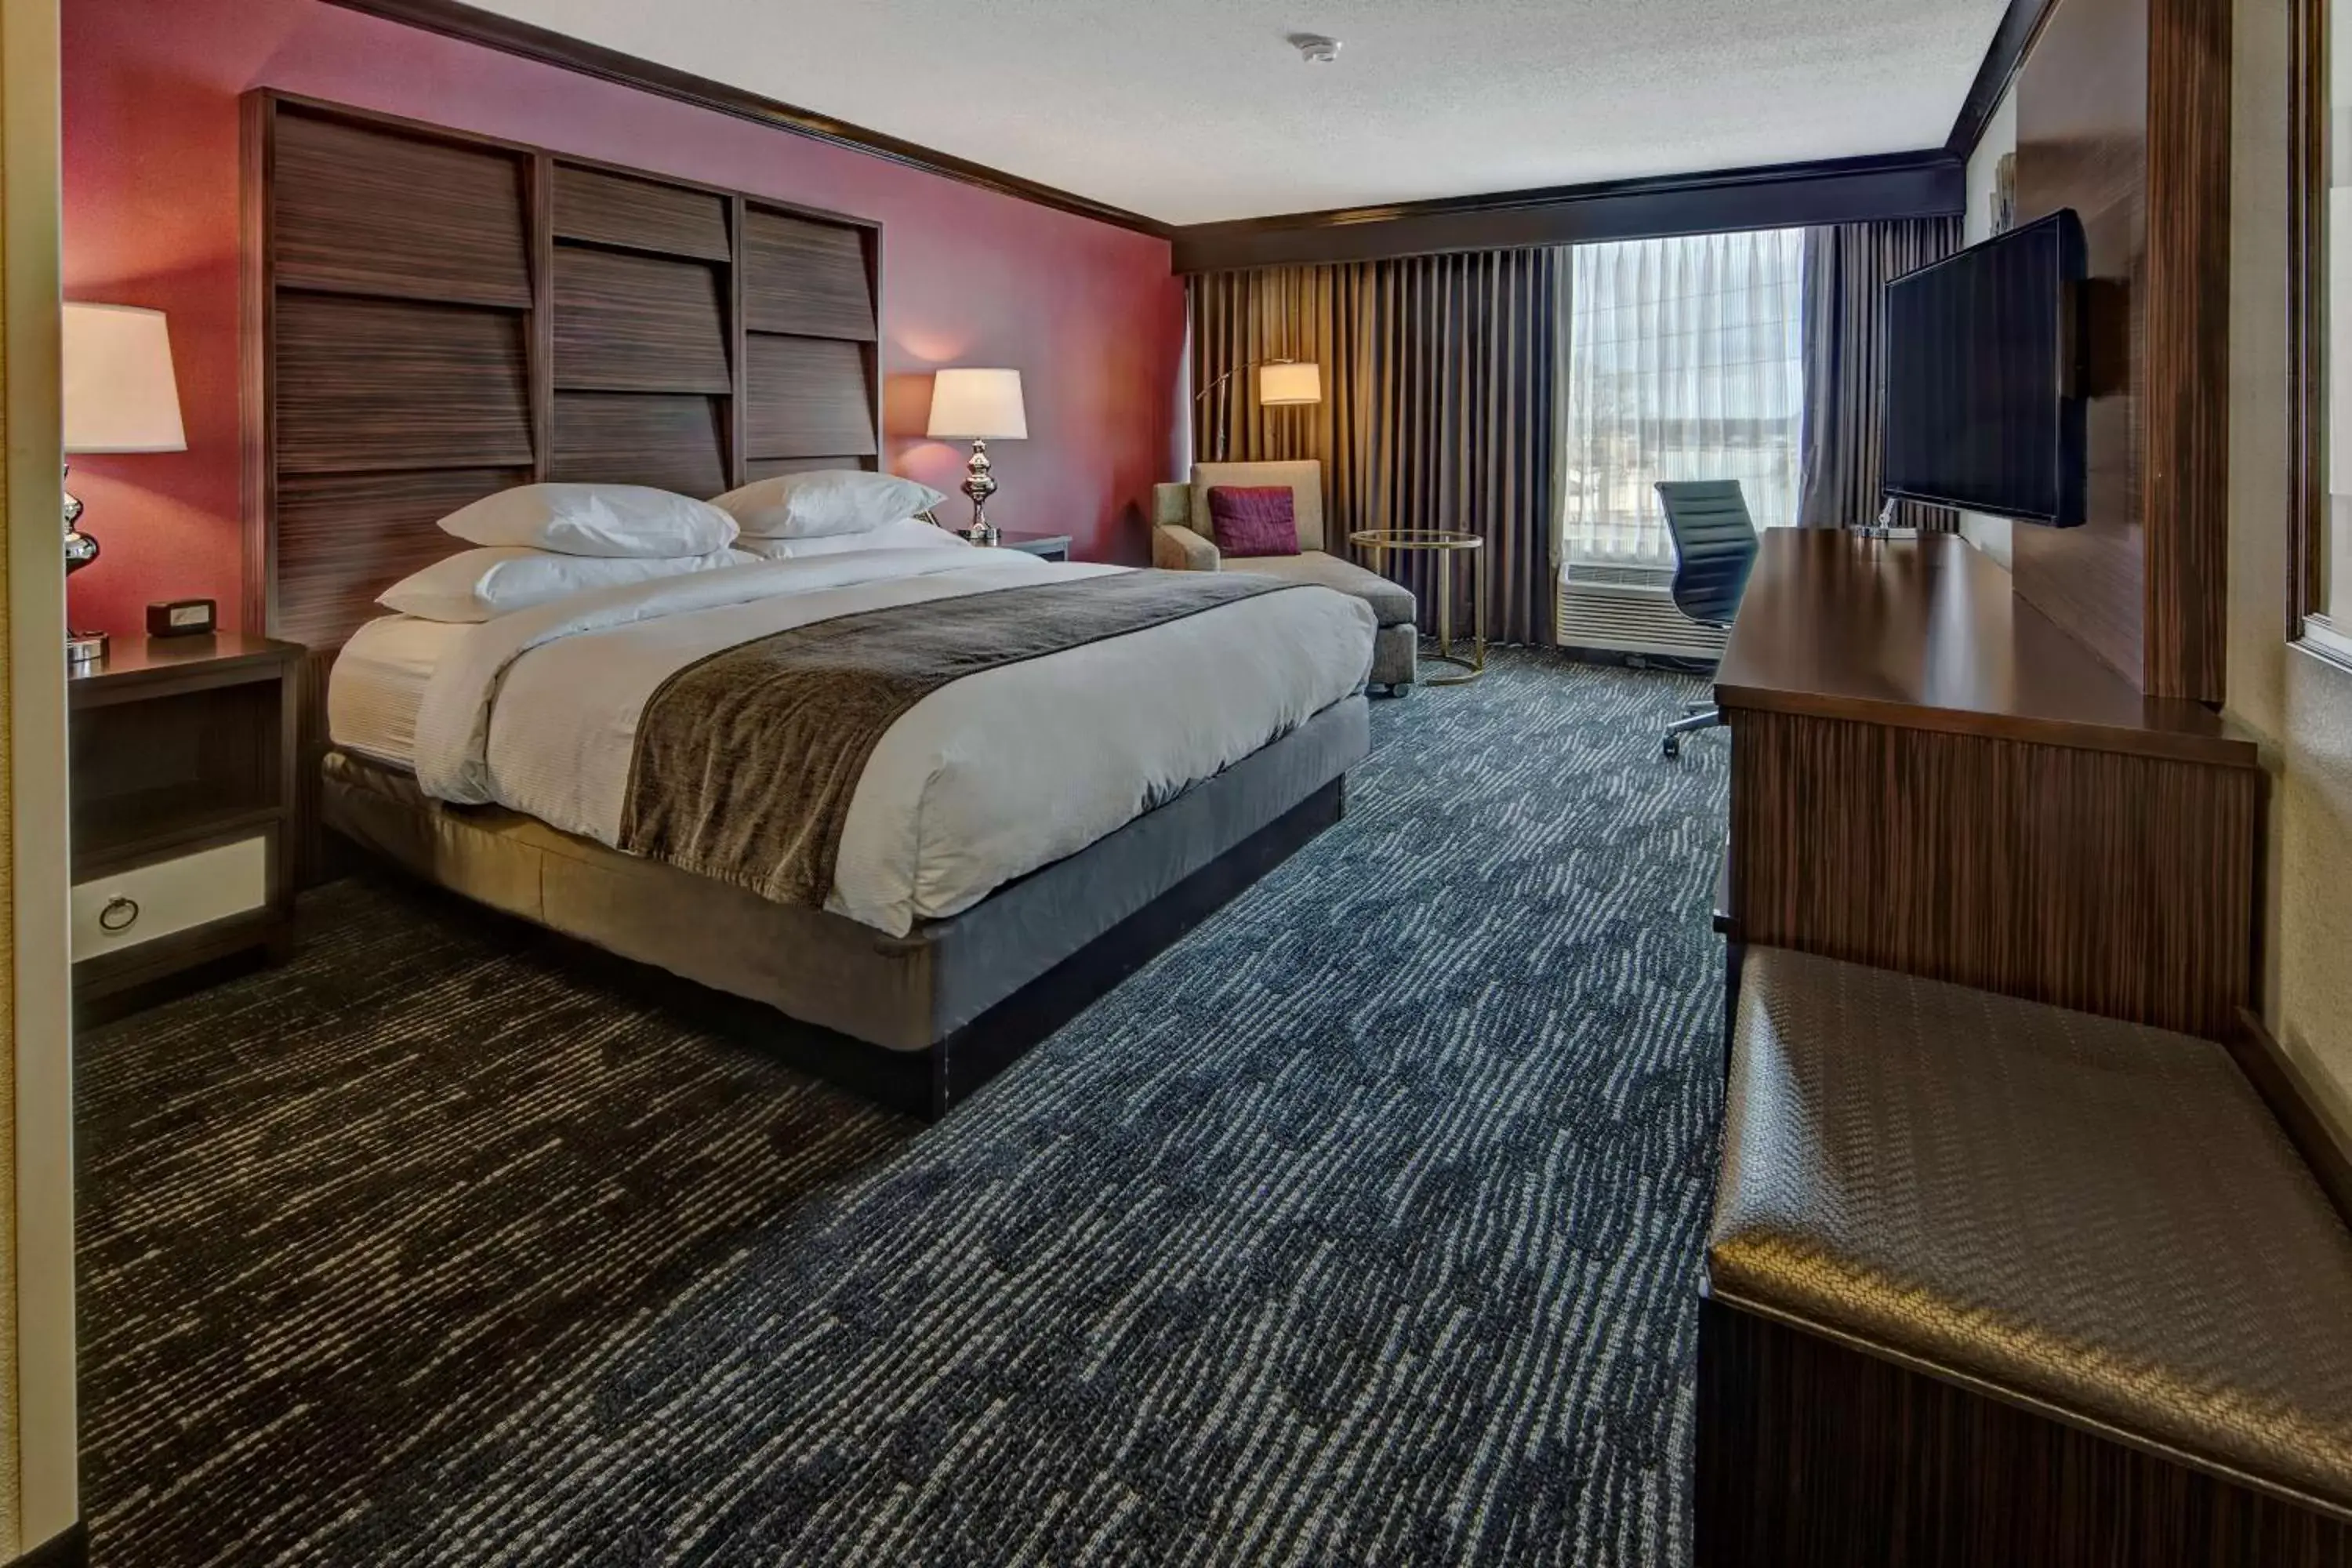 King Room with River View in DoubleTree by Hilton Decatur Riverfront